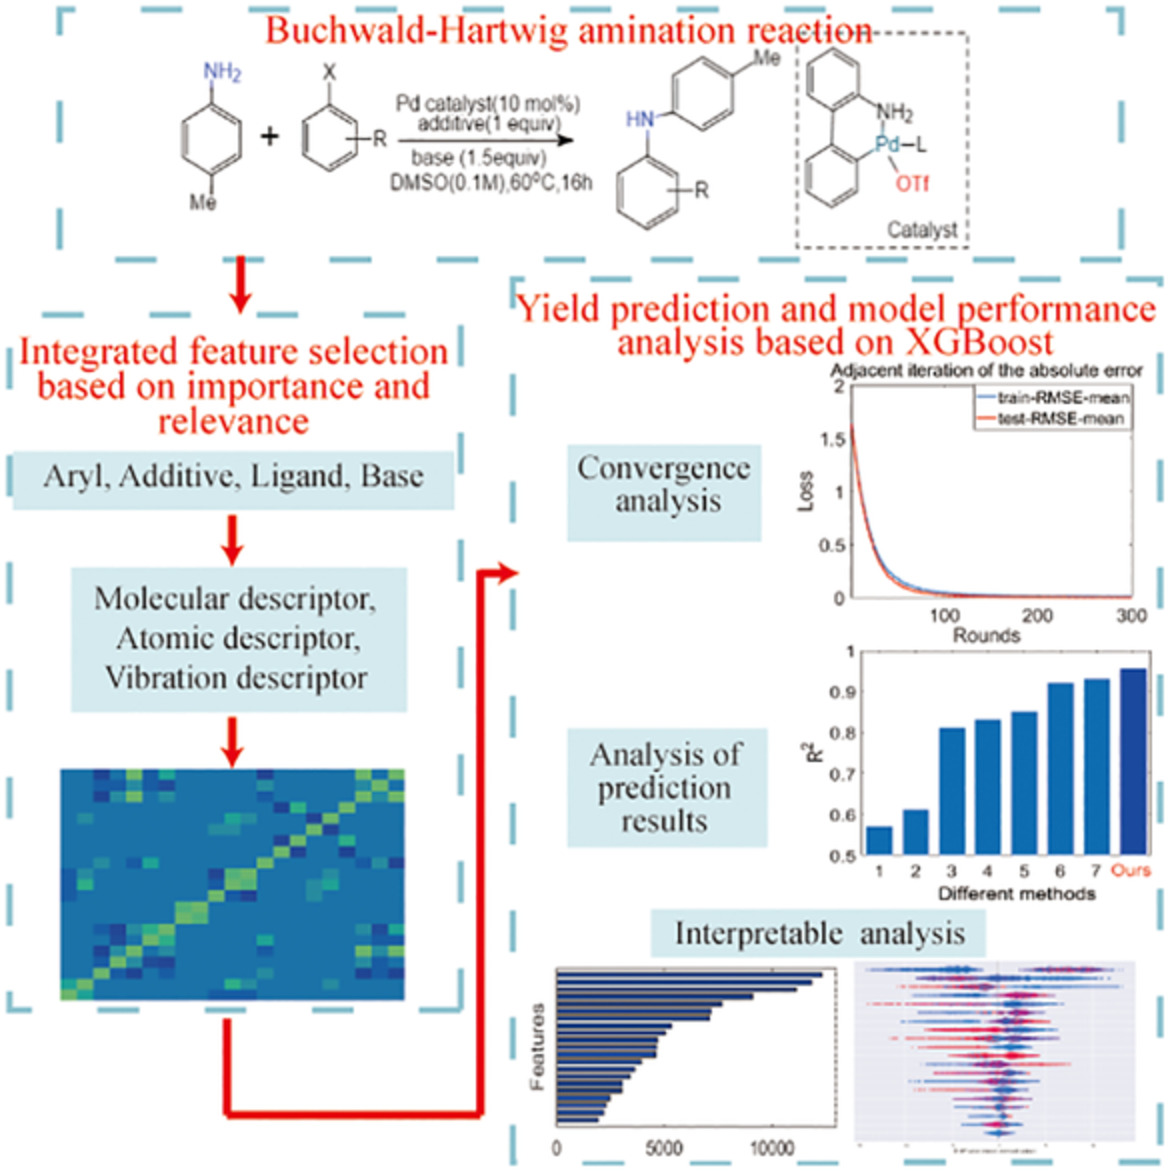 XGBoost‐based intelligence yield prediction and reaction factors analysis of amination reaction